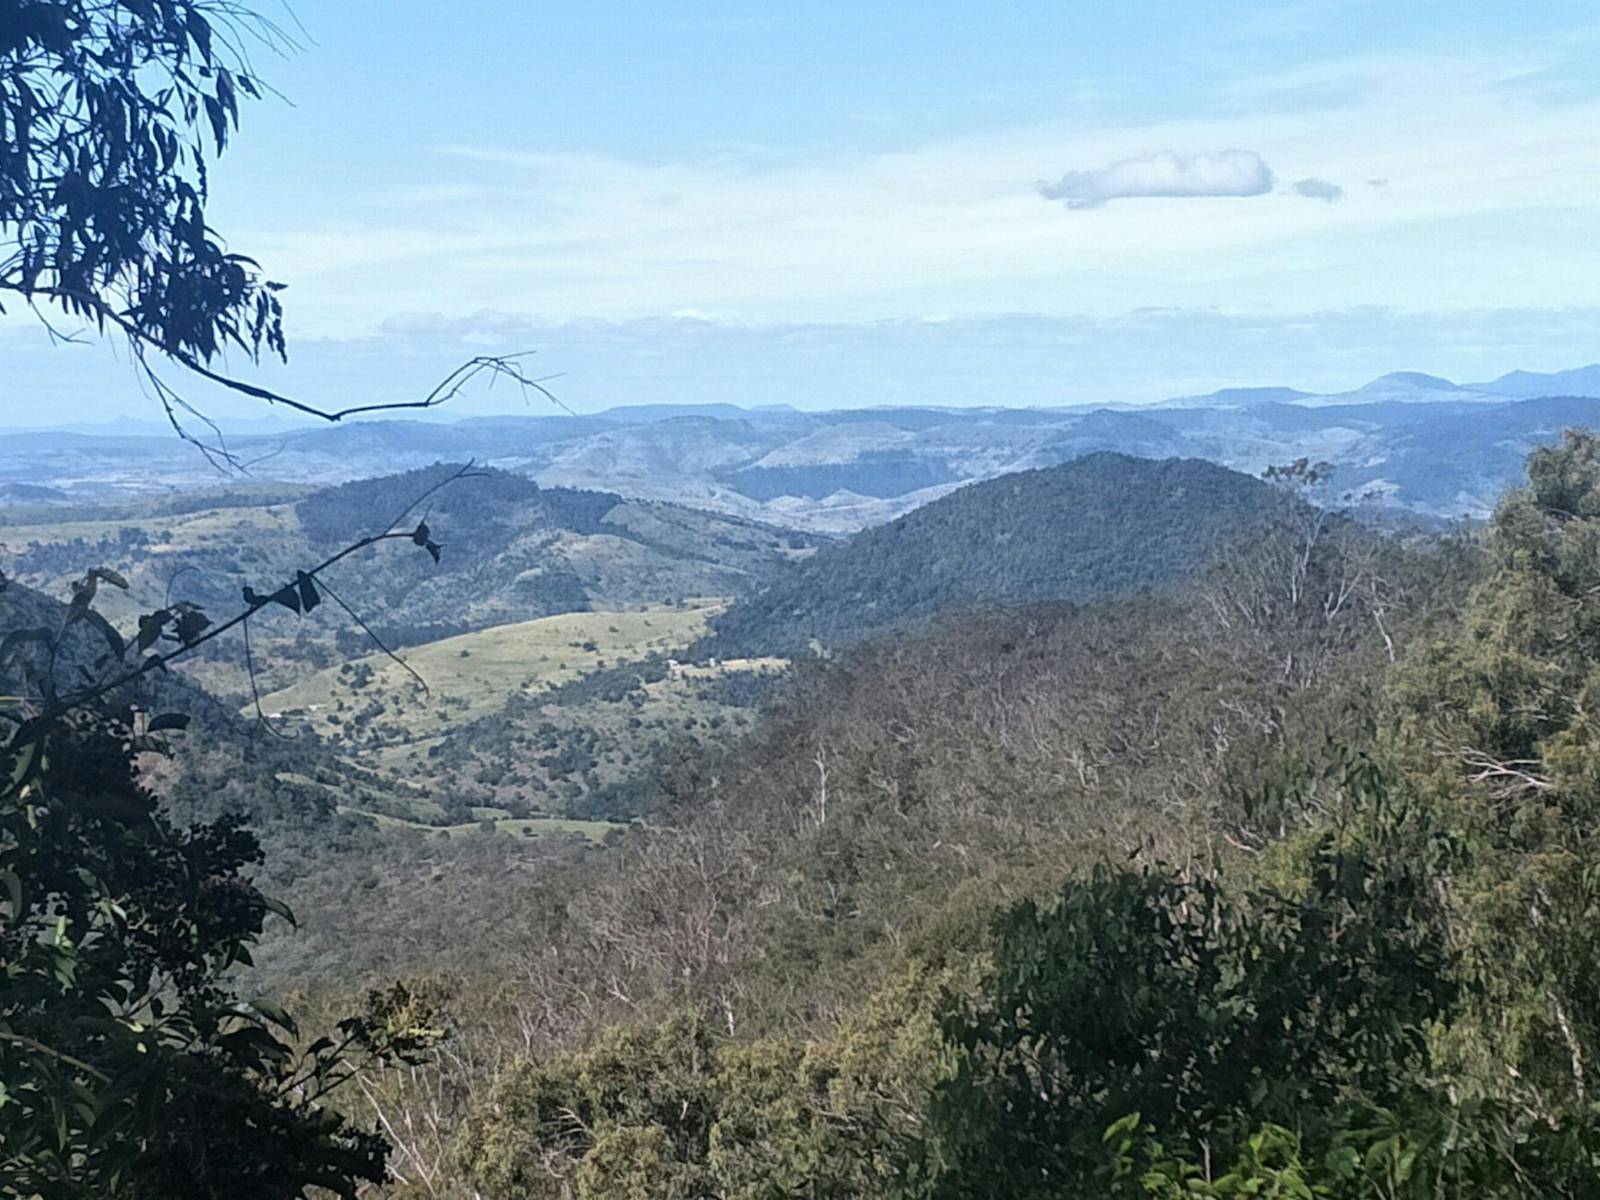 Enjoy Toowoomba's magnificent views from various lookout points.